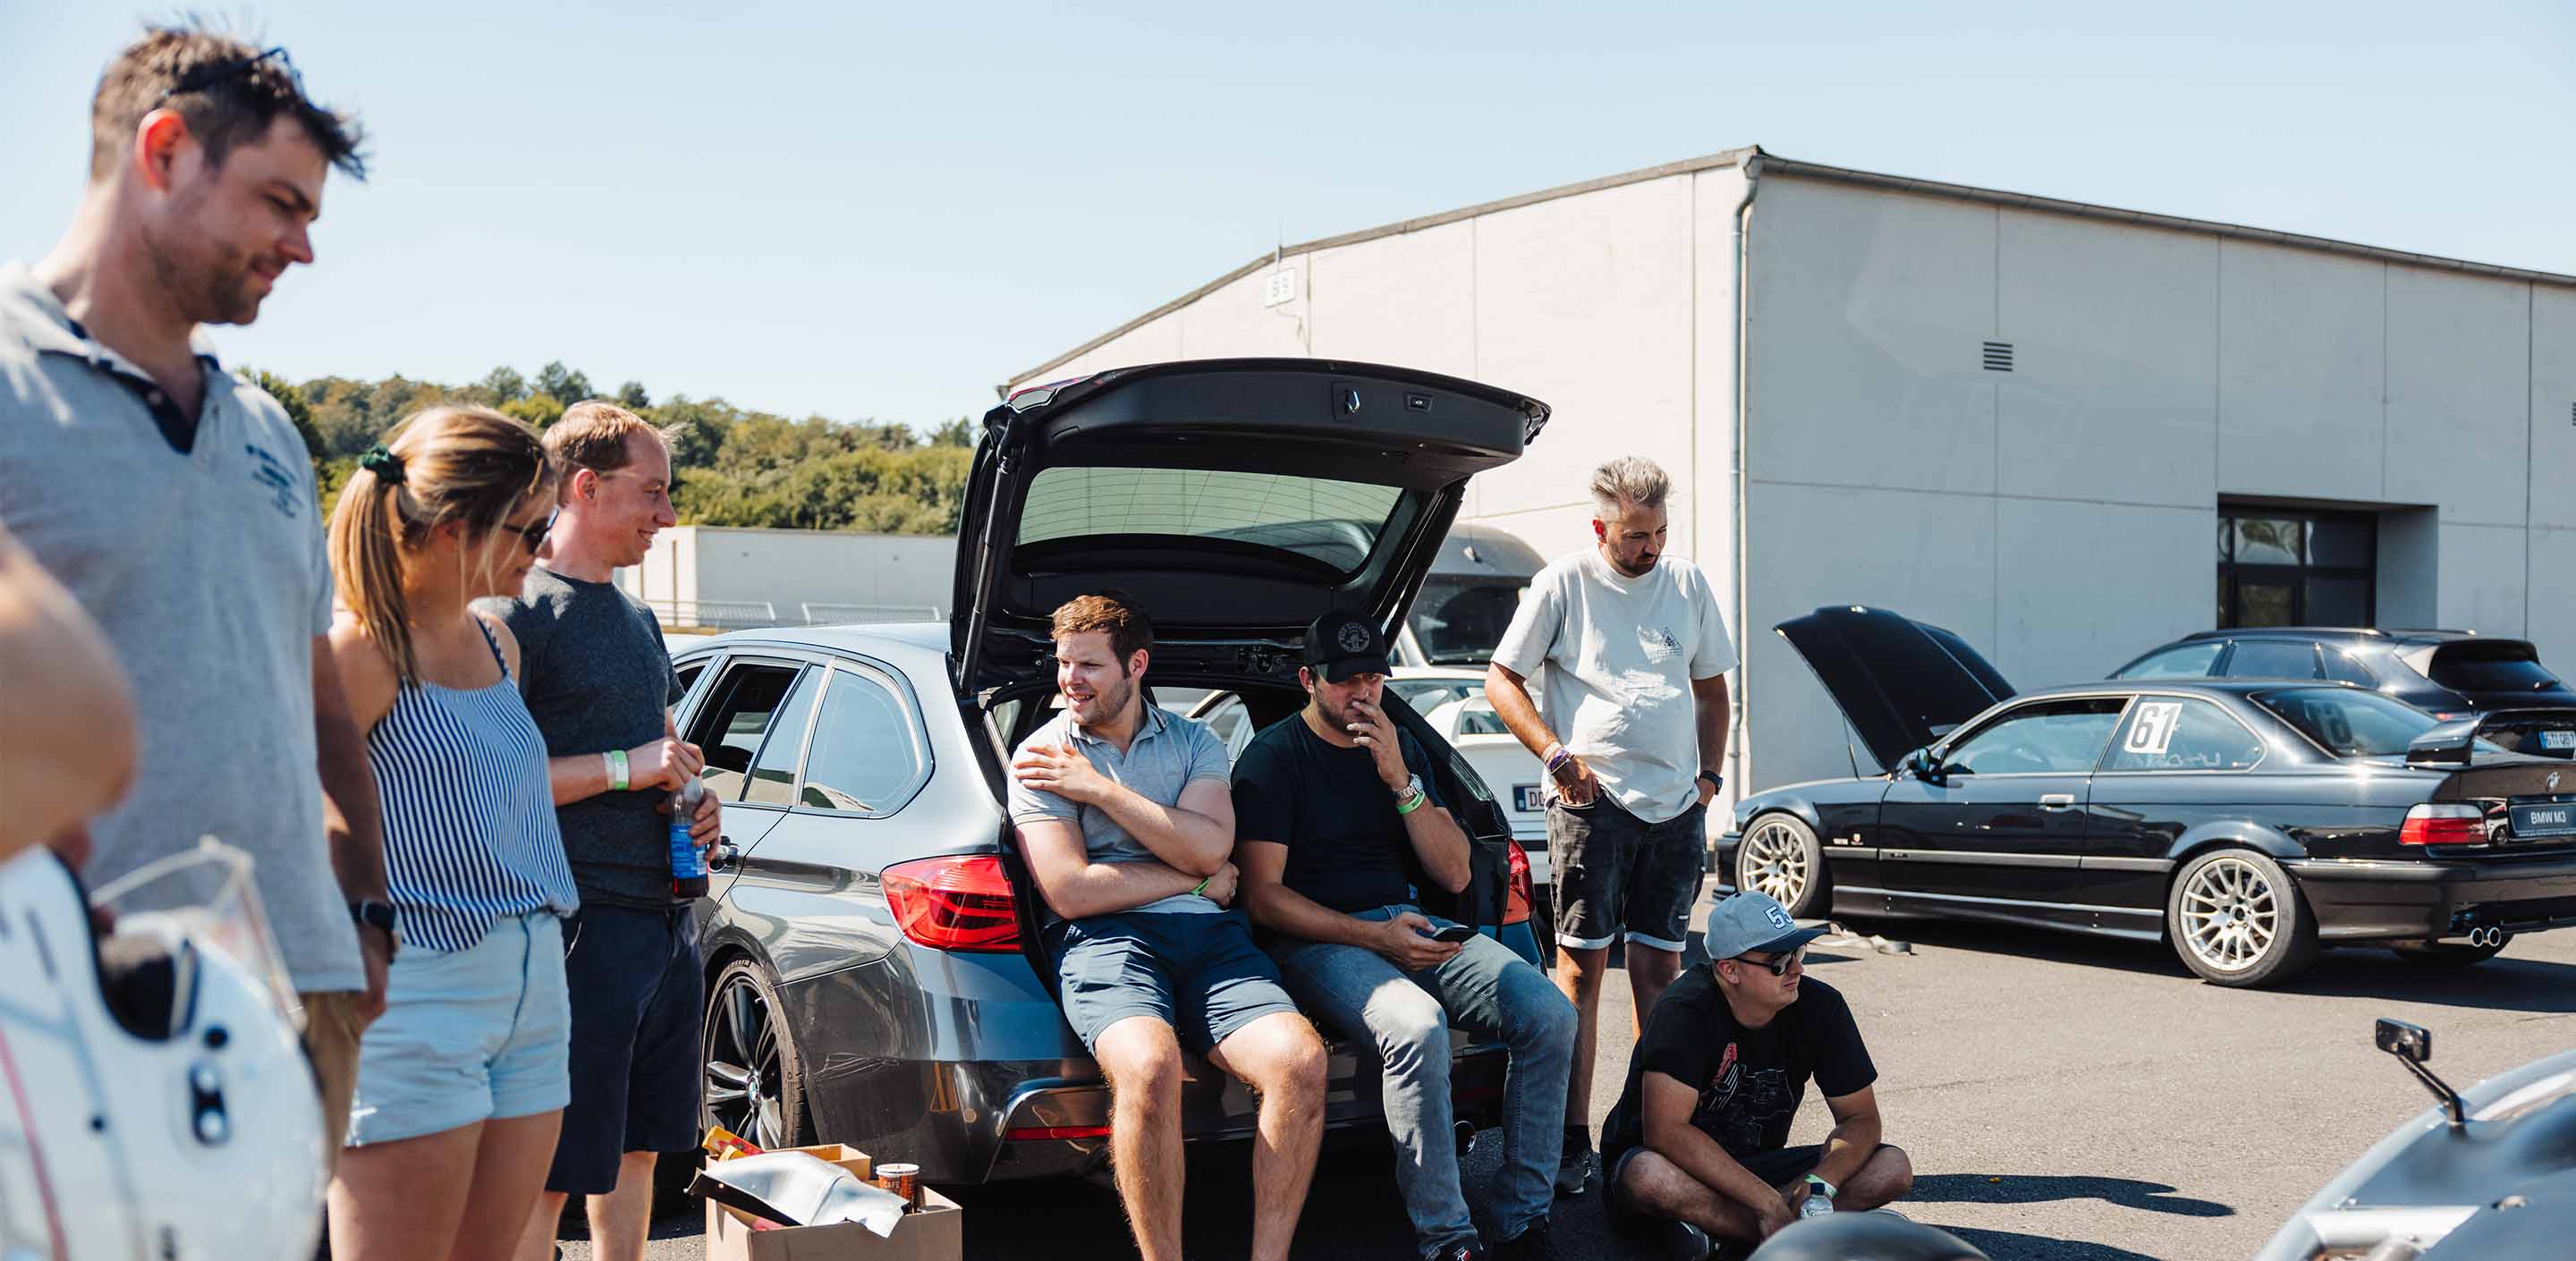 A group of Track Day participants is seen relaxing in the Paddock during a GP Days Open Pitlane Track Day at Bilster Berg